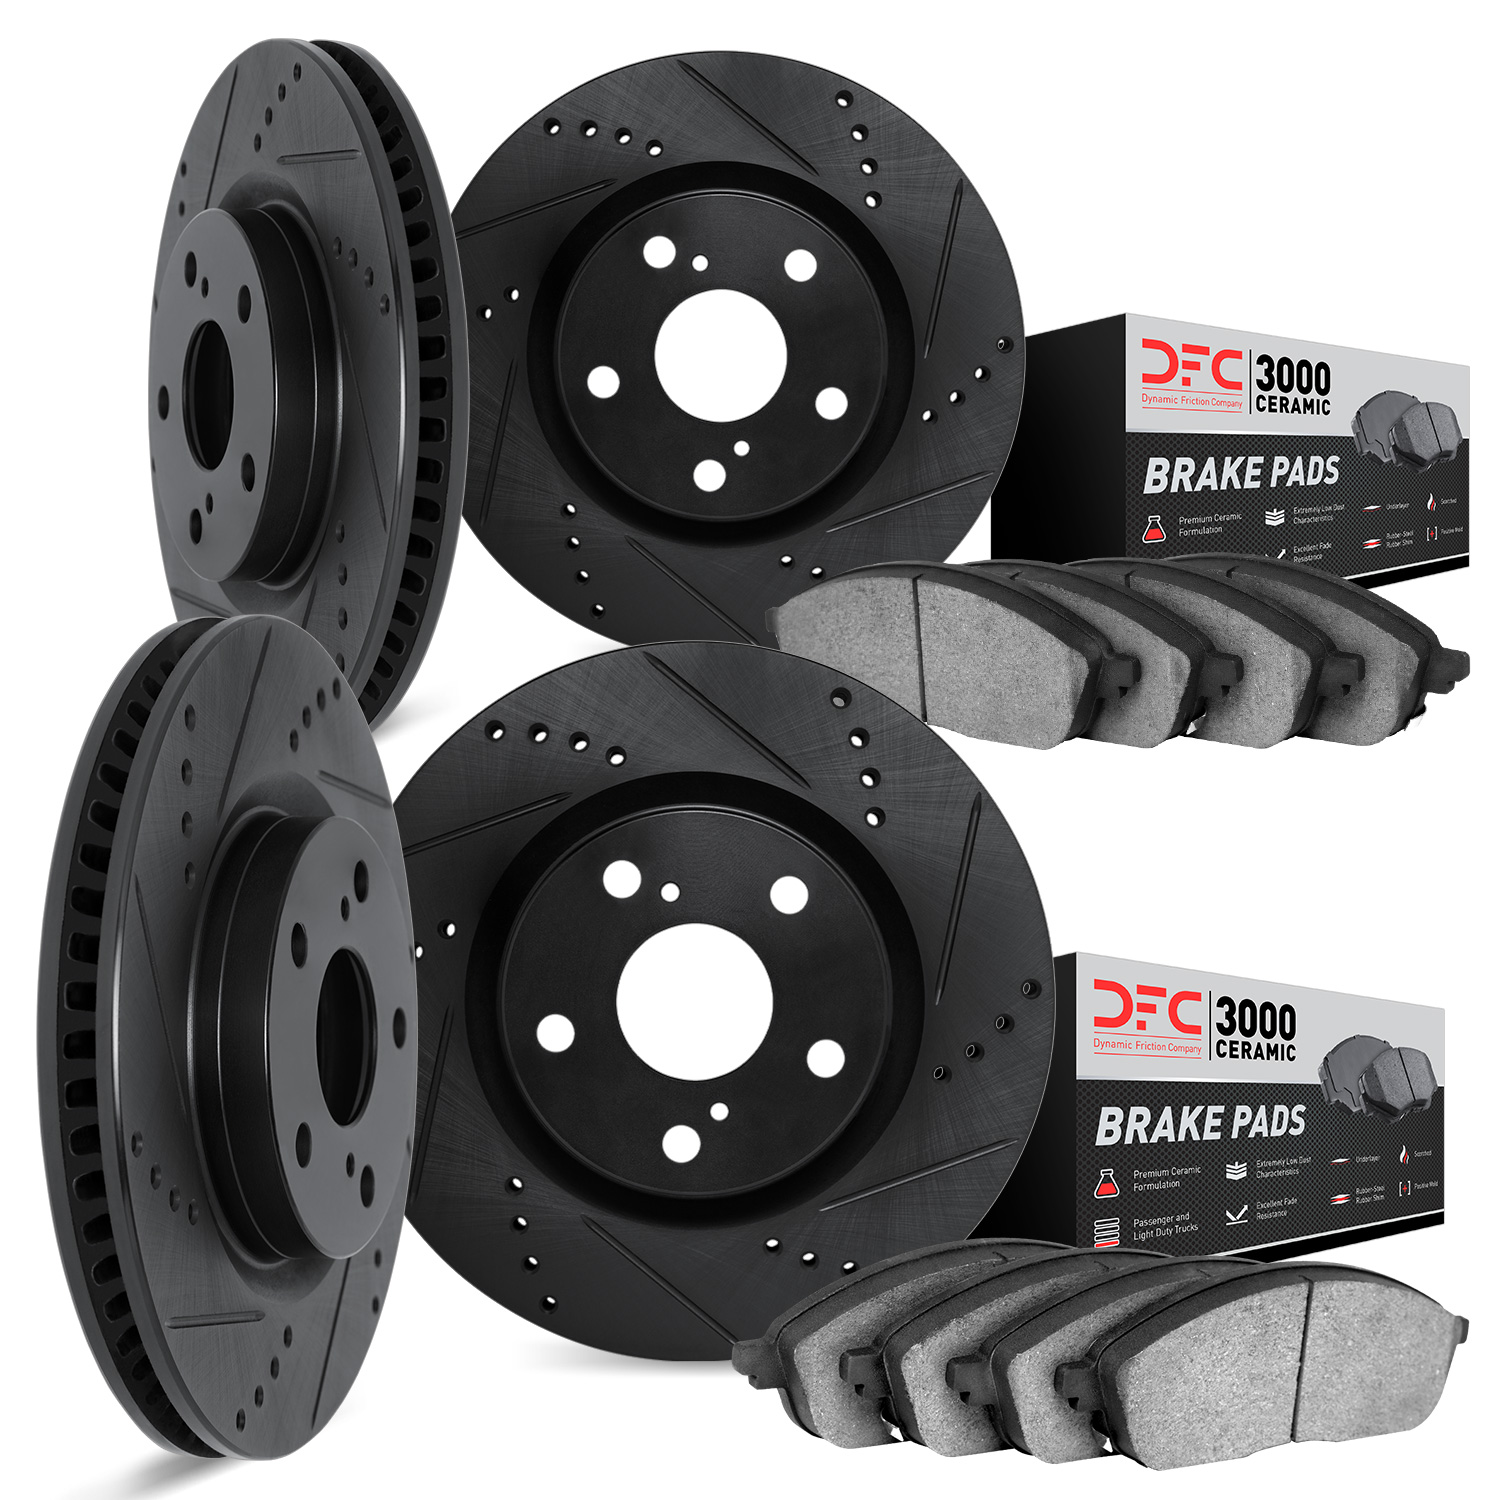 8304-13039 Drilled/Slotted Brake Rotors with 3000-Series Ceramic Brake Pads Kit [Black], 2015-2015 Subaru, Position: Front and R